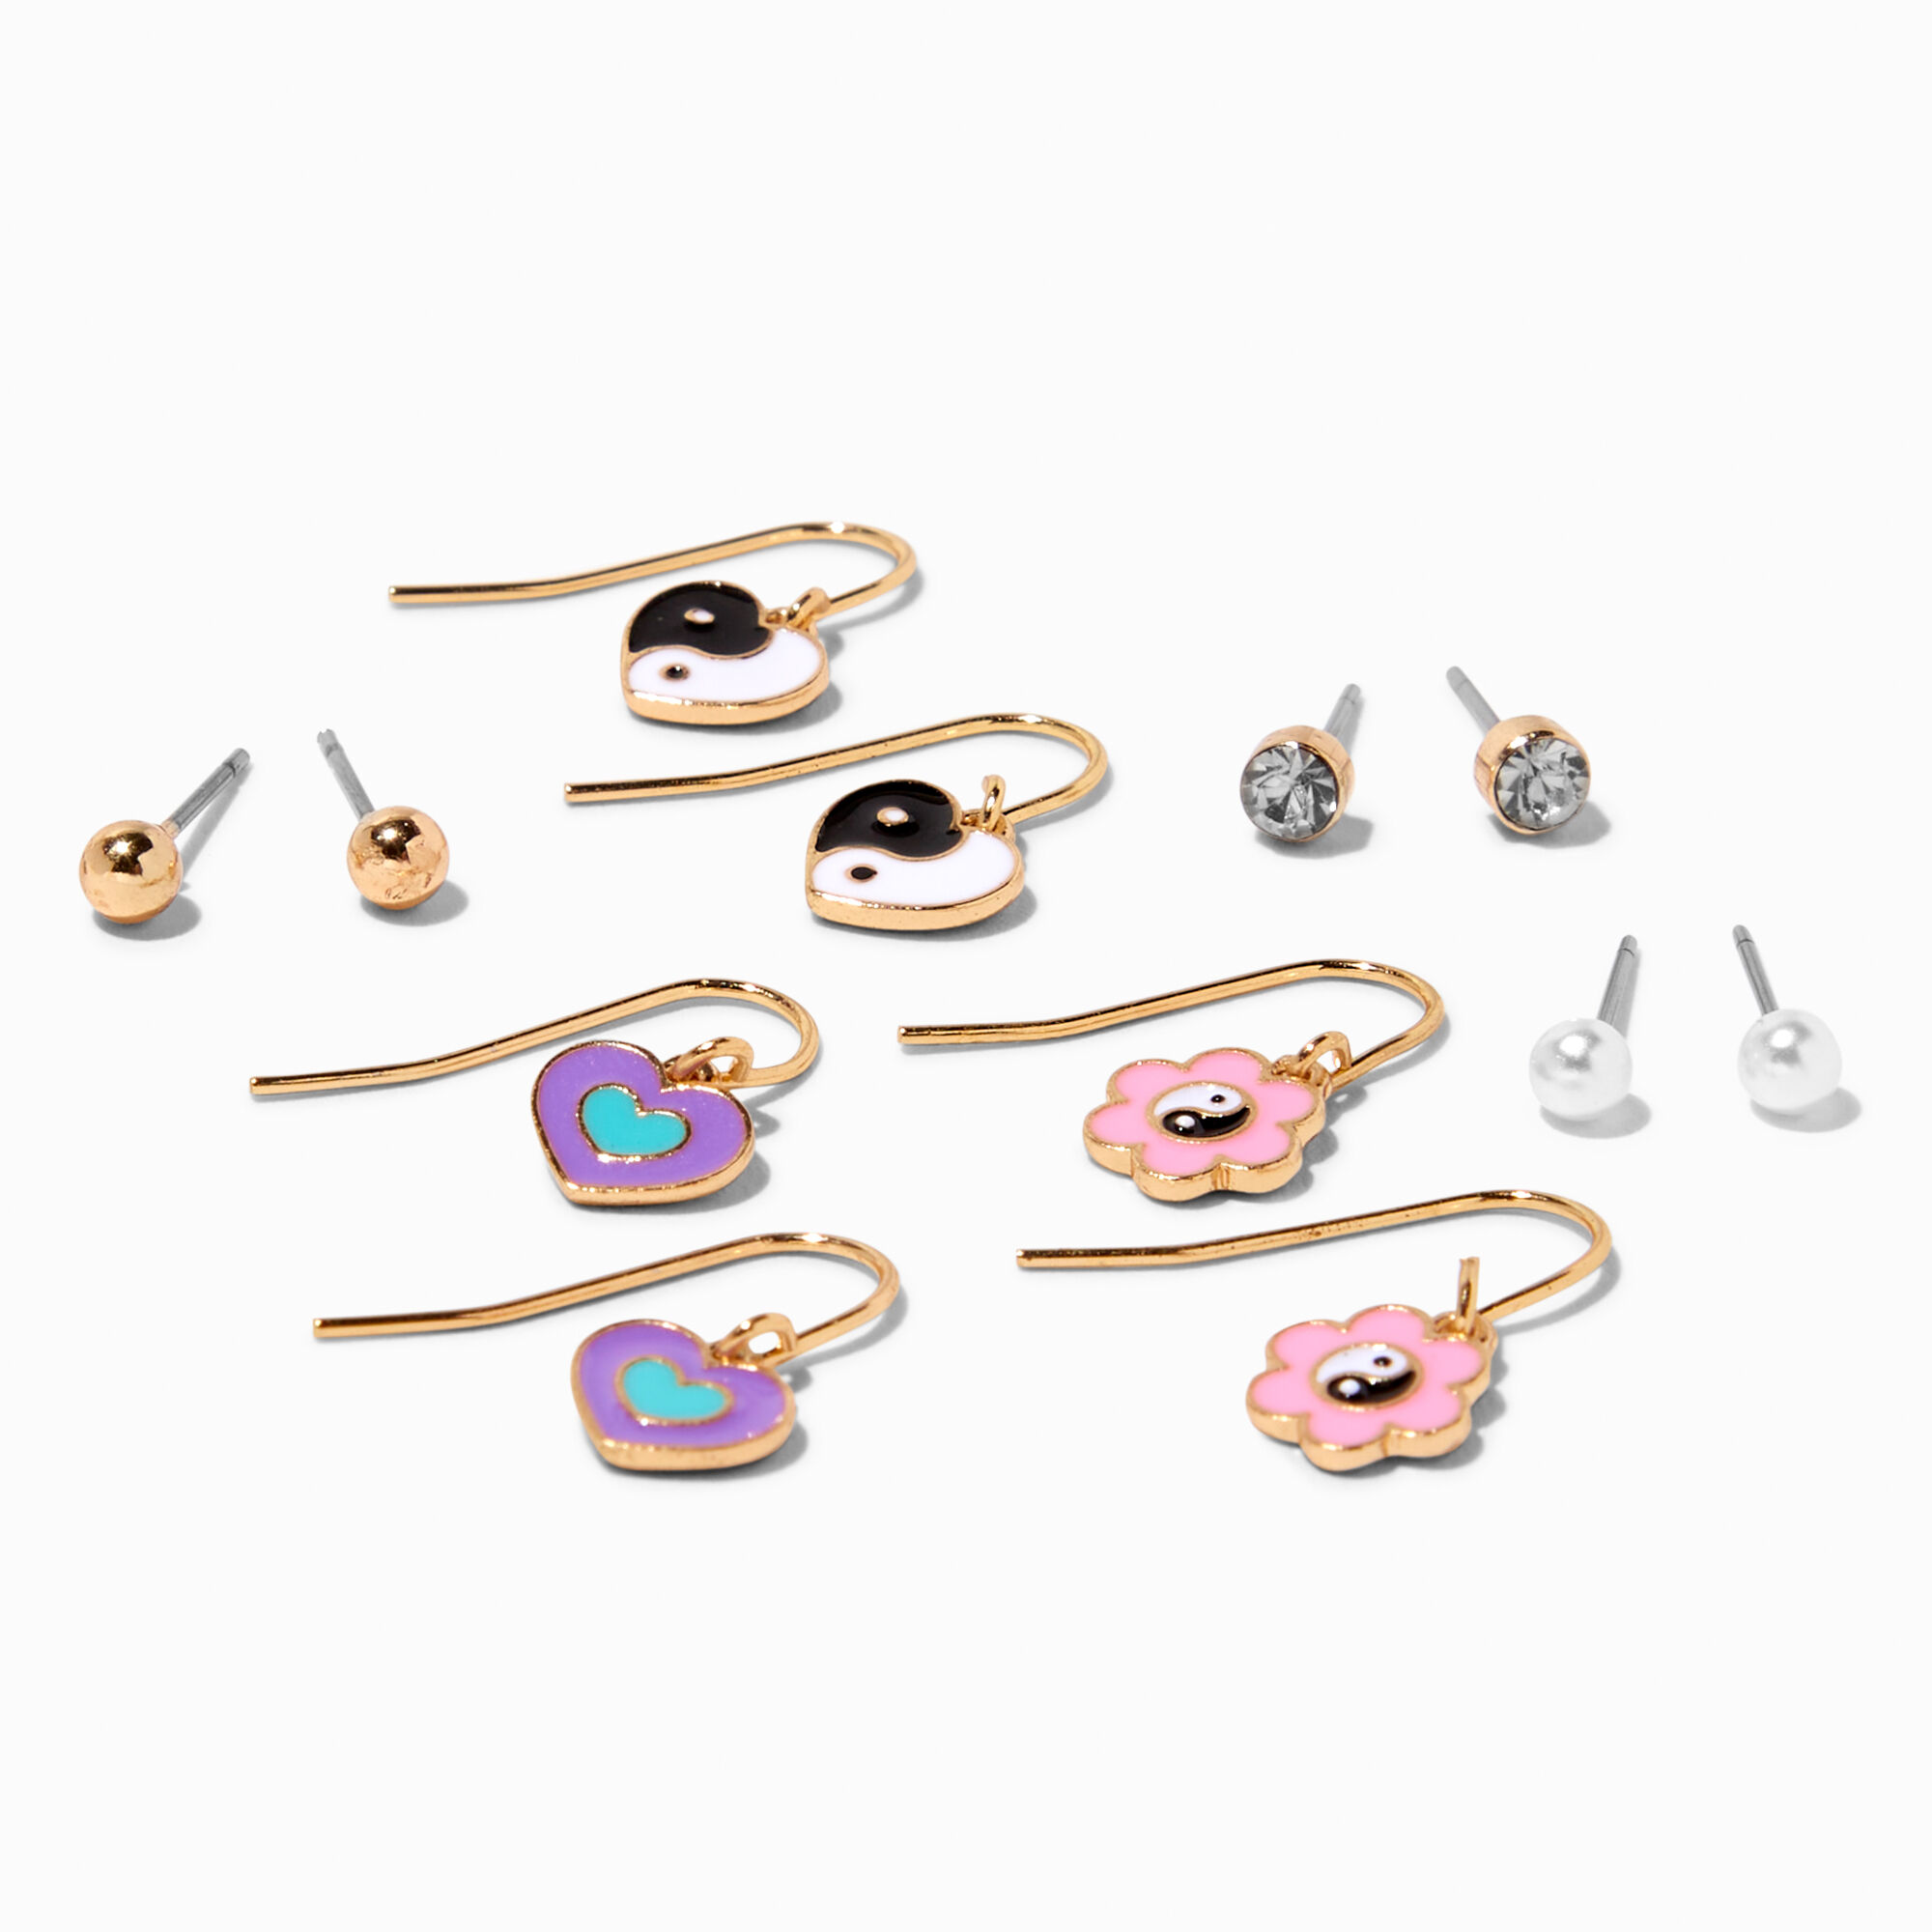 View Claires Yin Yang Earrings Set 6 Pack Gold information